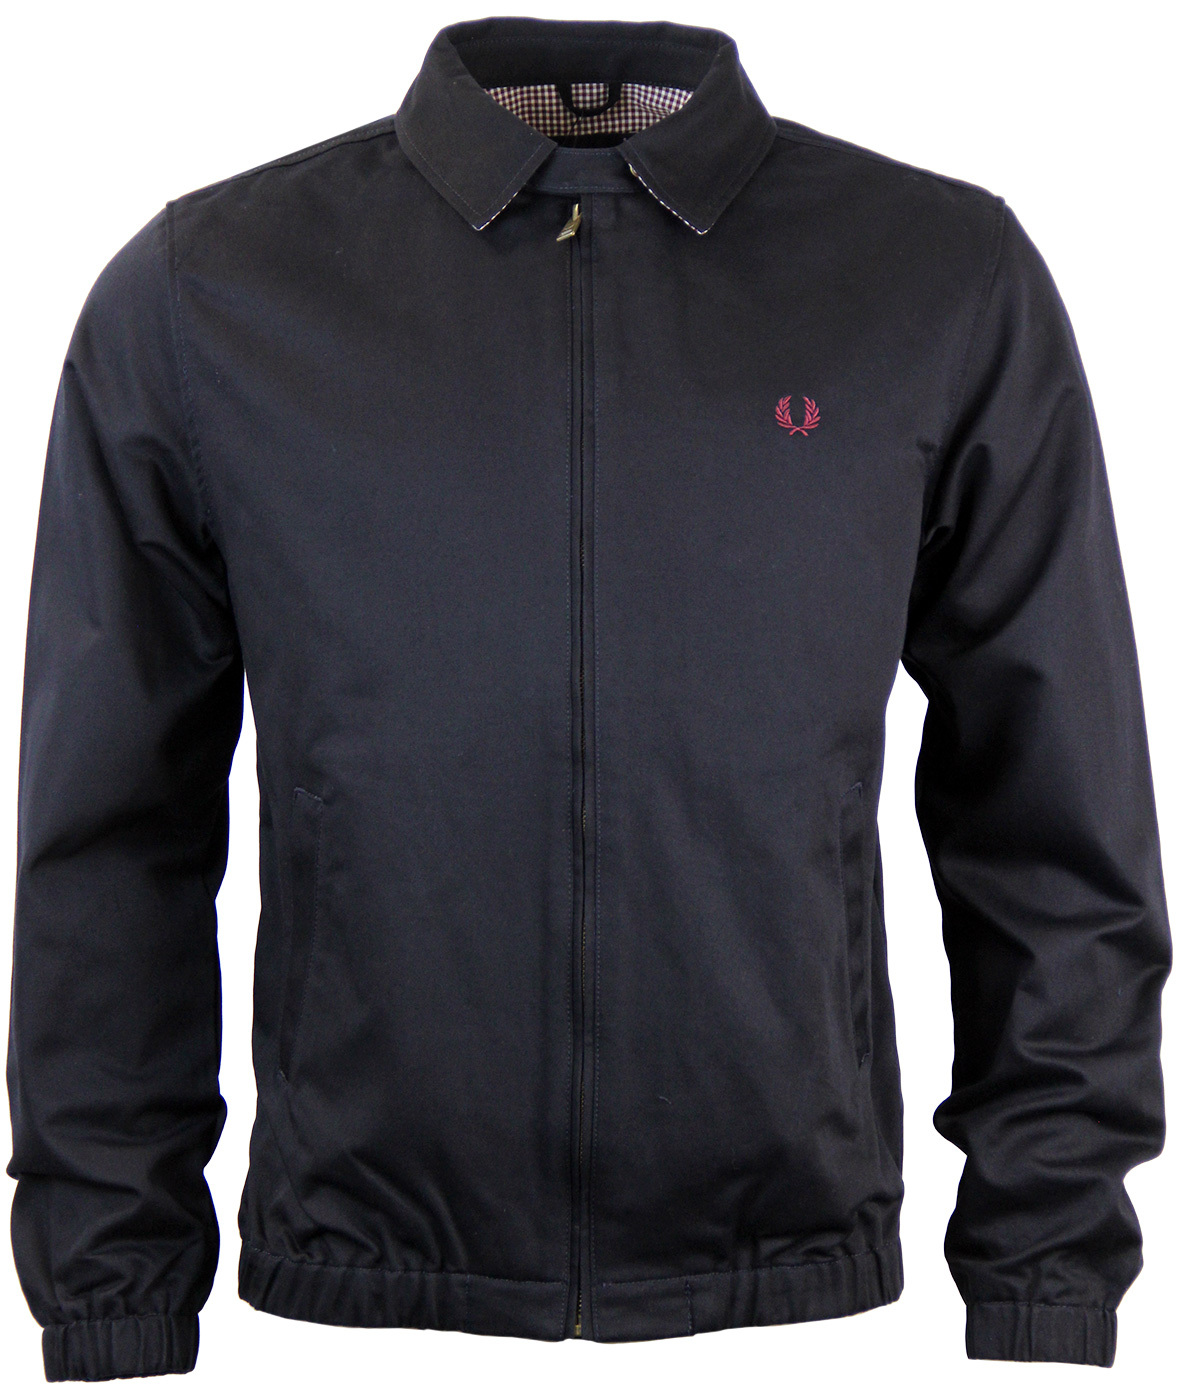 FRED PERRY Retro Mod 70s Caban Jacket in Navy